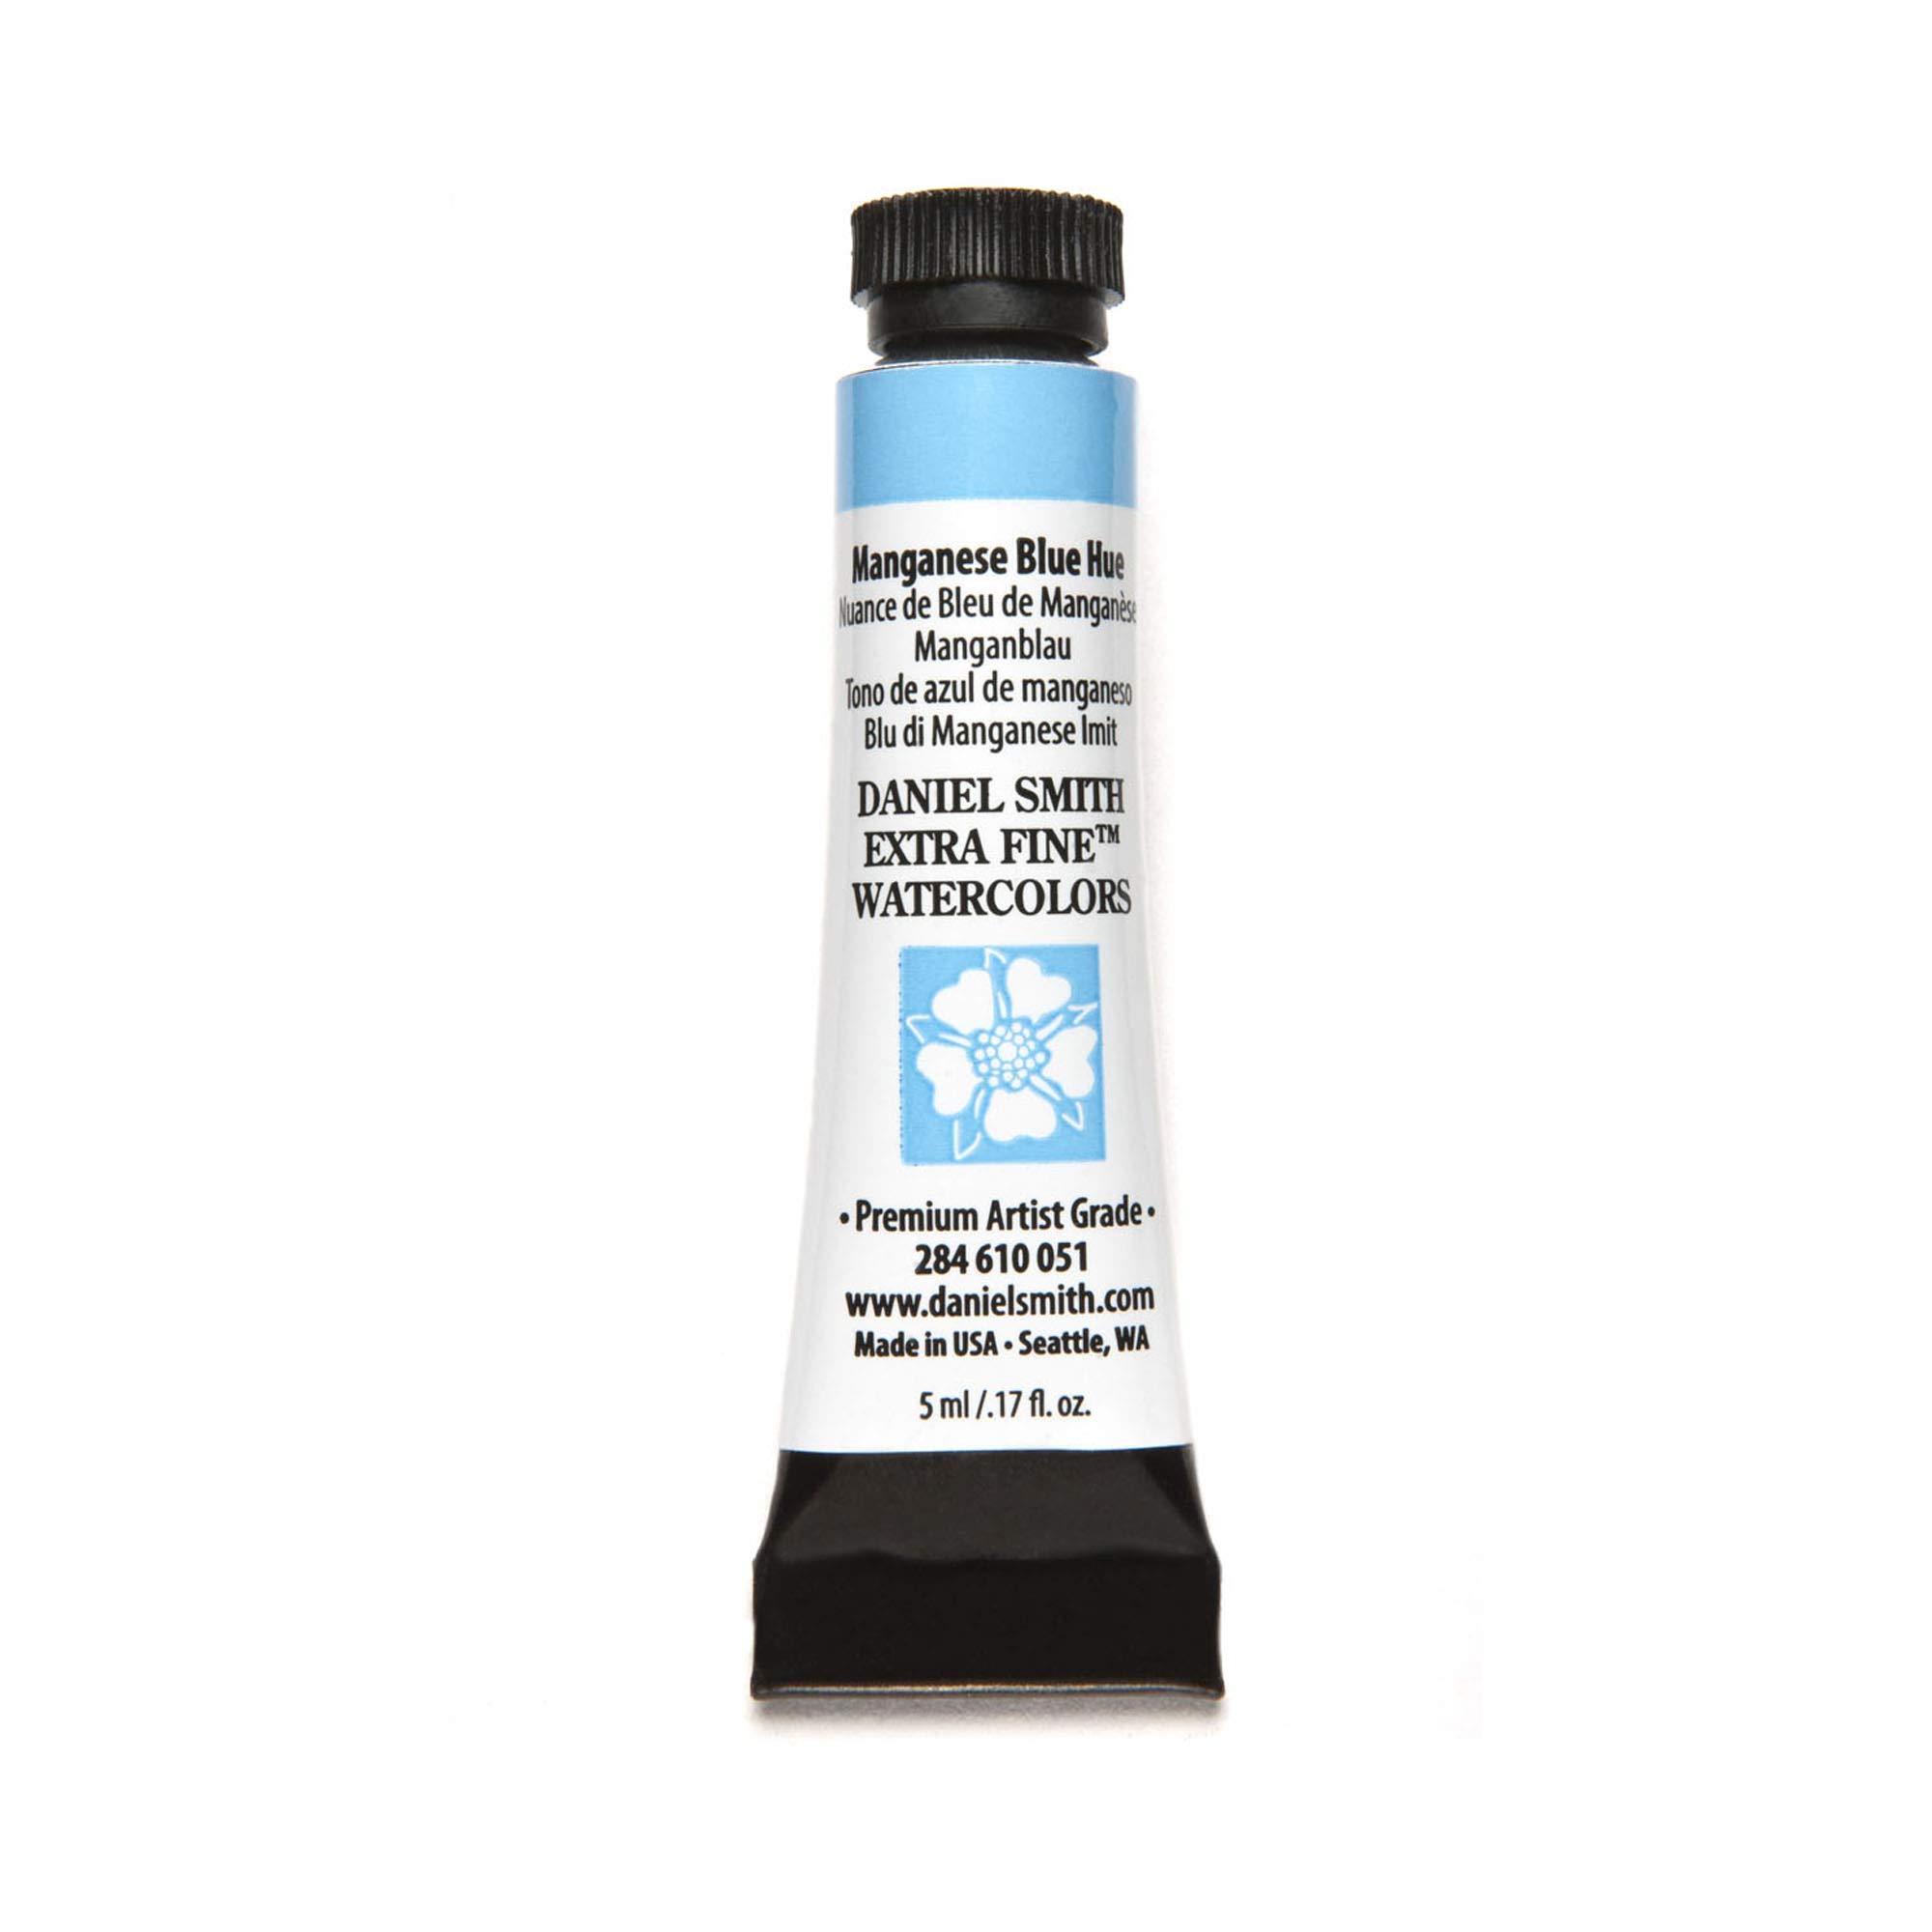 Daniel Smith Extra Fine Watercolor Paint, 5Ml Tube, Manganese Blue Hue, 284610051 0.17 Fl Oz (Pack Of 1)